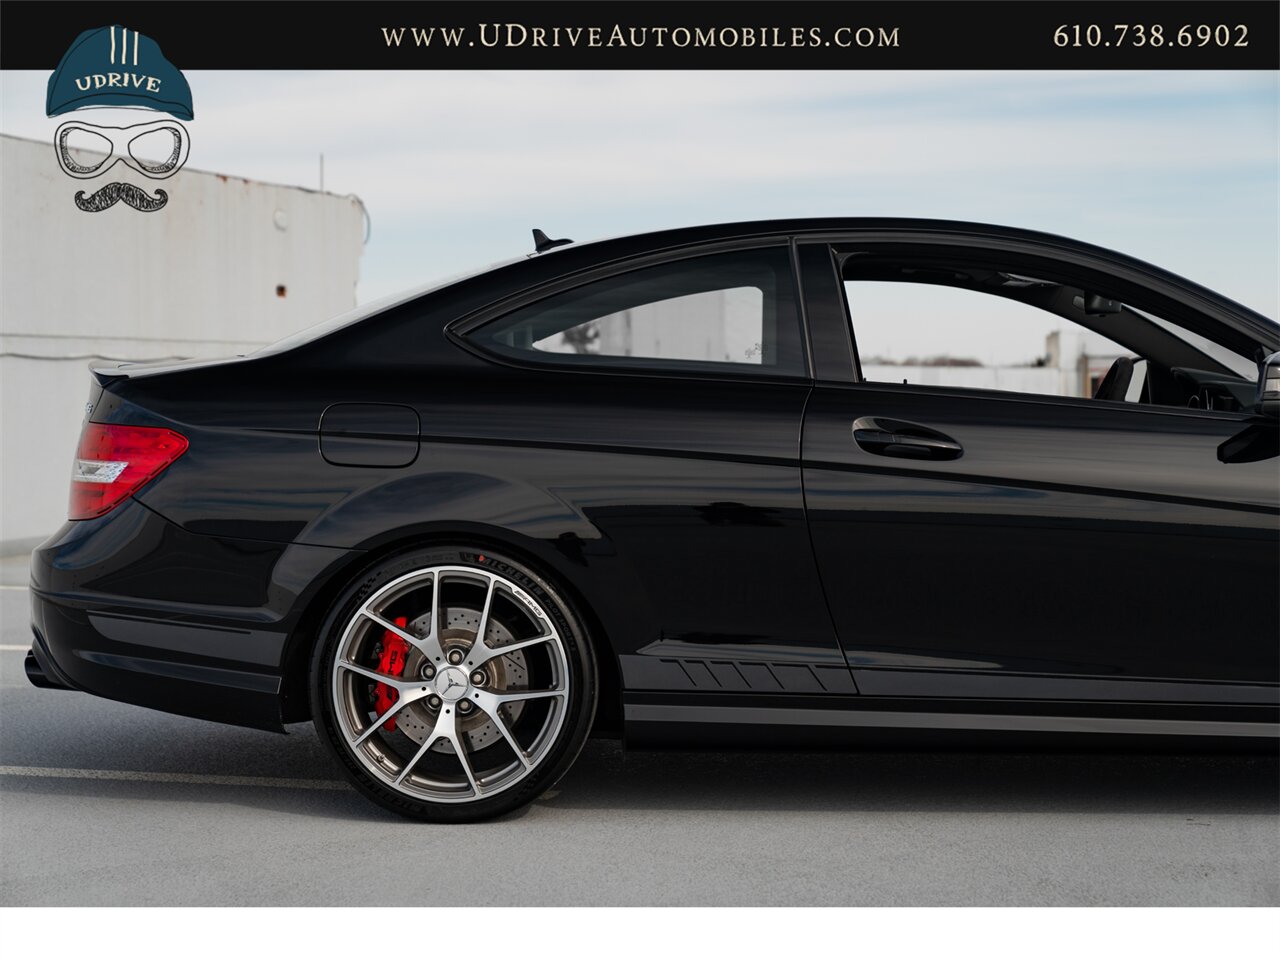 2015 Mercedes-Benz C63 AMG  Edition 507 17k Miles Pano Sunroof Locking Diff 507hp - Photo 18 - West Chester, PA 19382